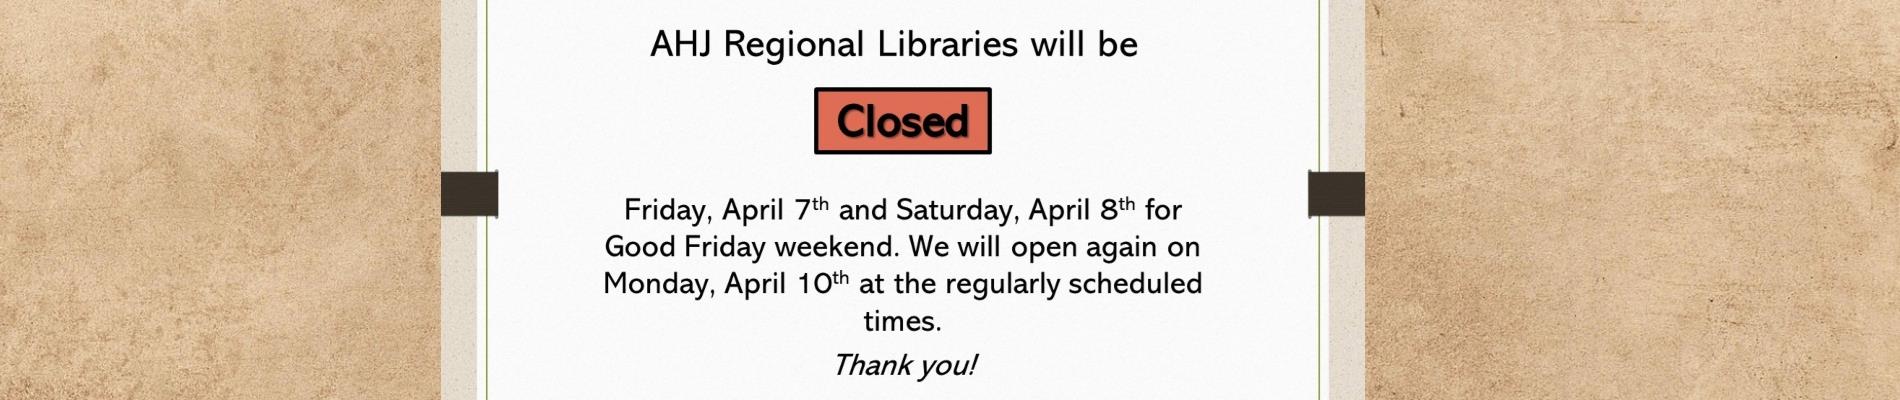 All Libraries closed Friday, April 7th and Saturday, April 8th for Good Friday weekend. We will open again on Monday, April 10th at the regularly scheduled times. 